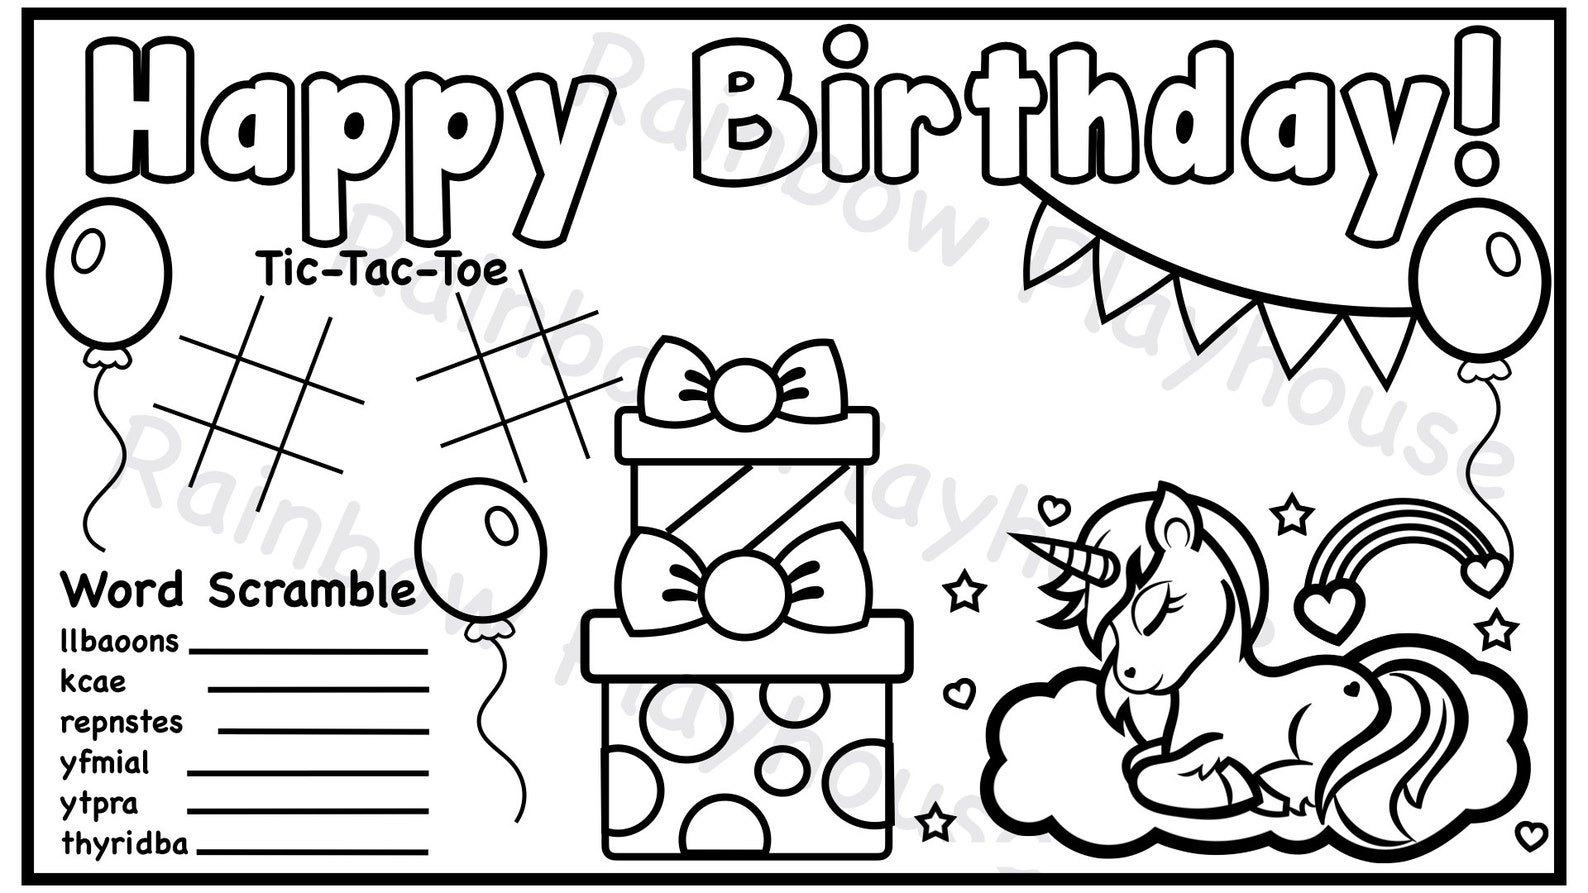 4 happy birthday unicorn themed coloring pages etsy